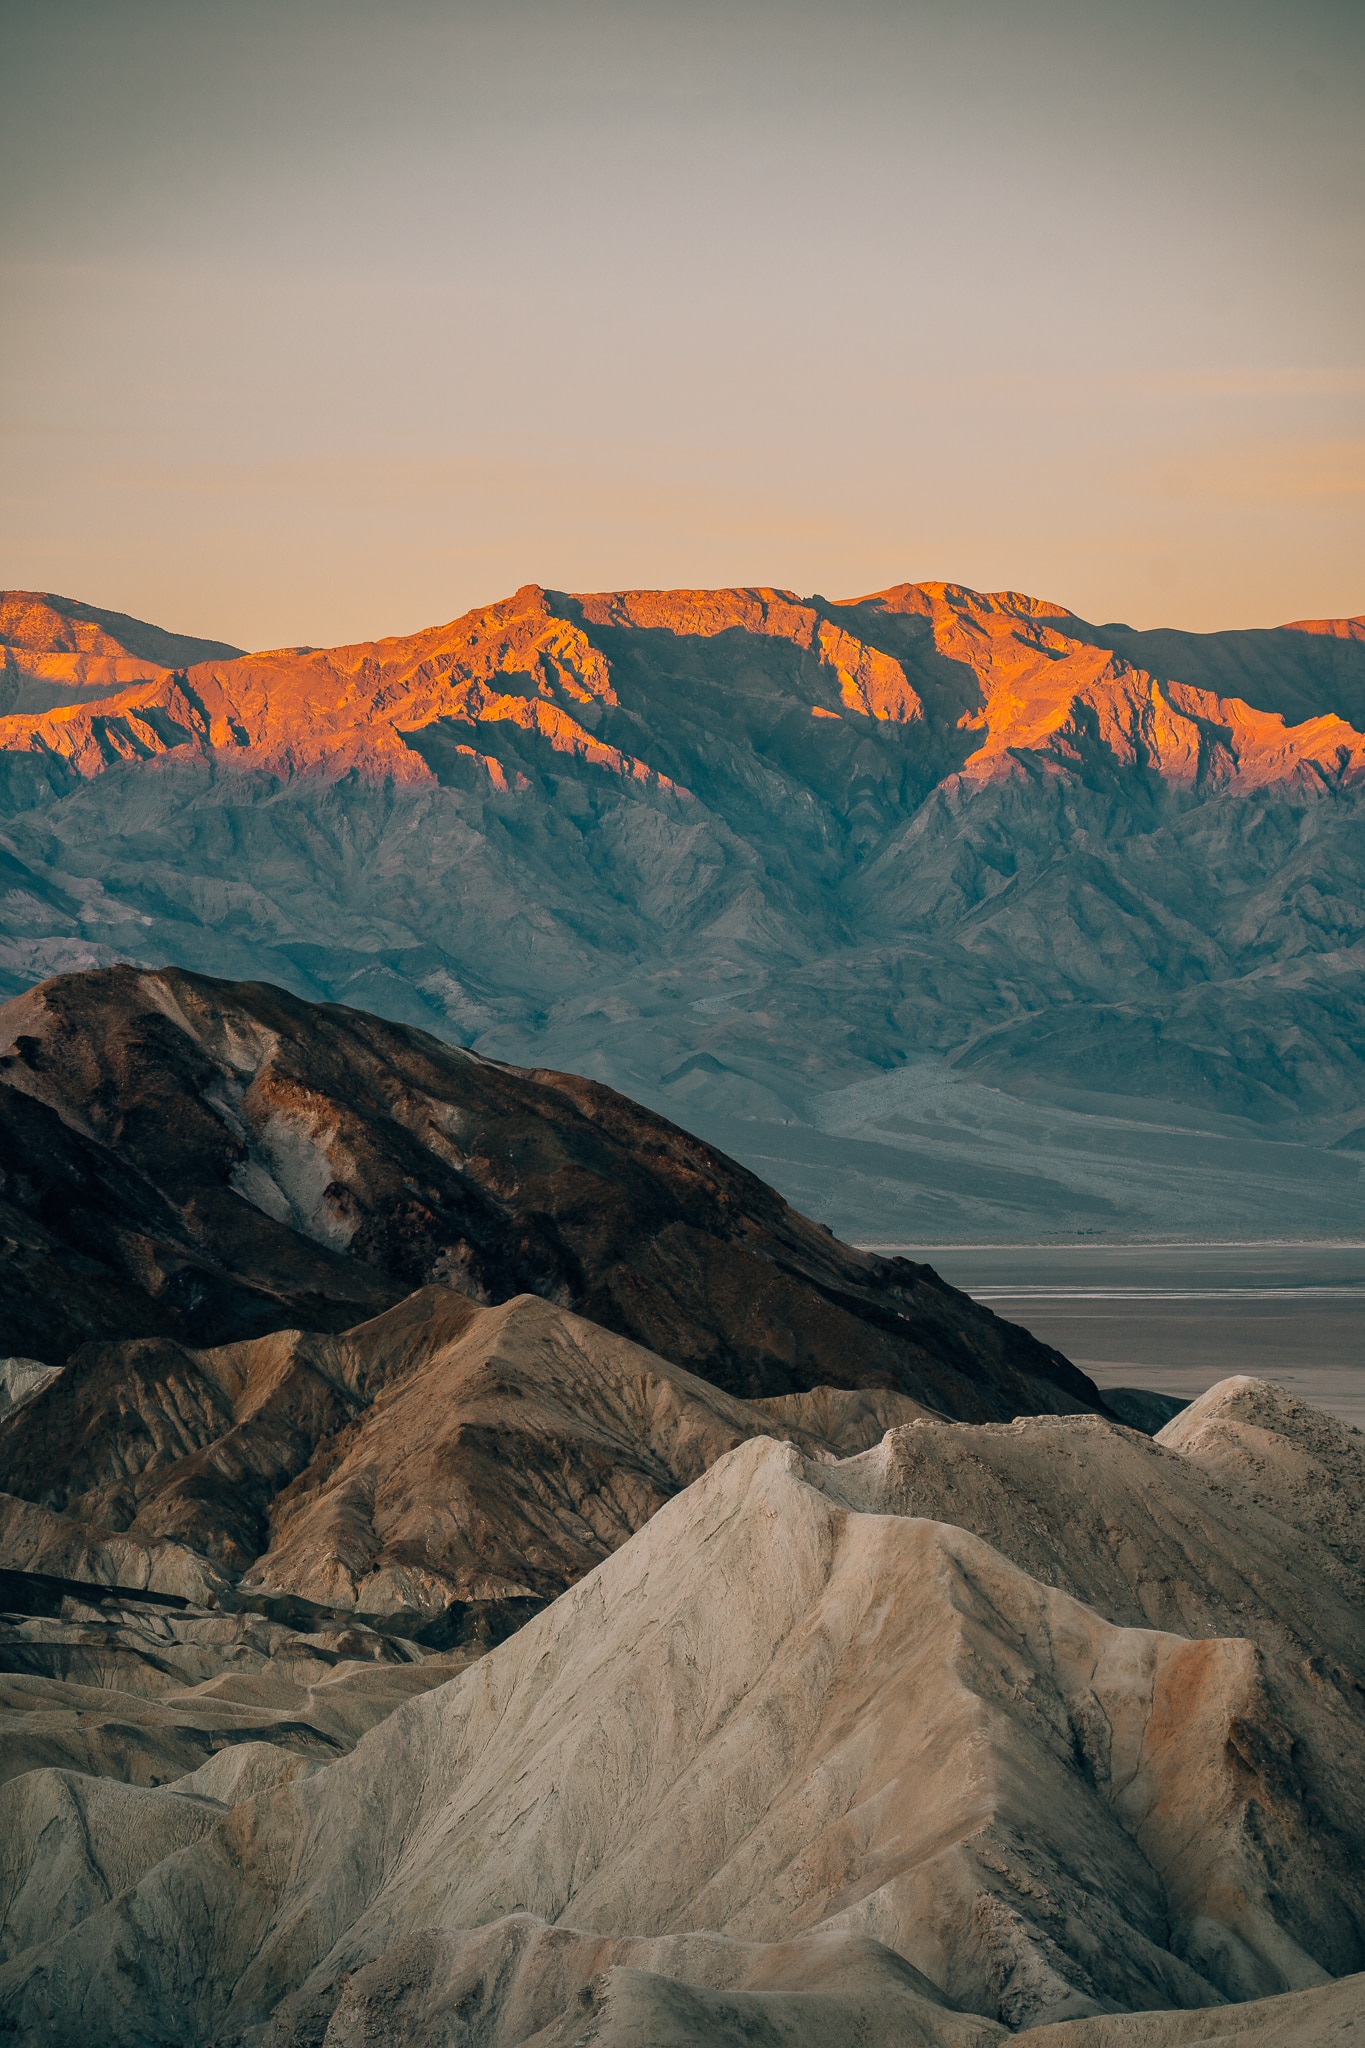 Sunrise at Zabrinskie Point with 3 layers of mountains